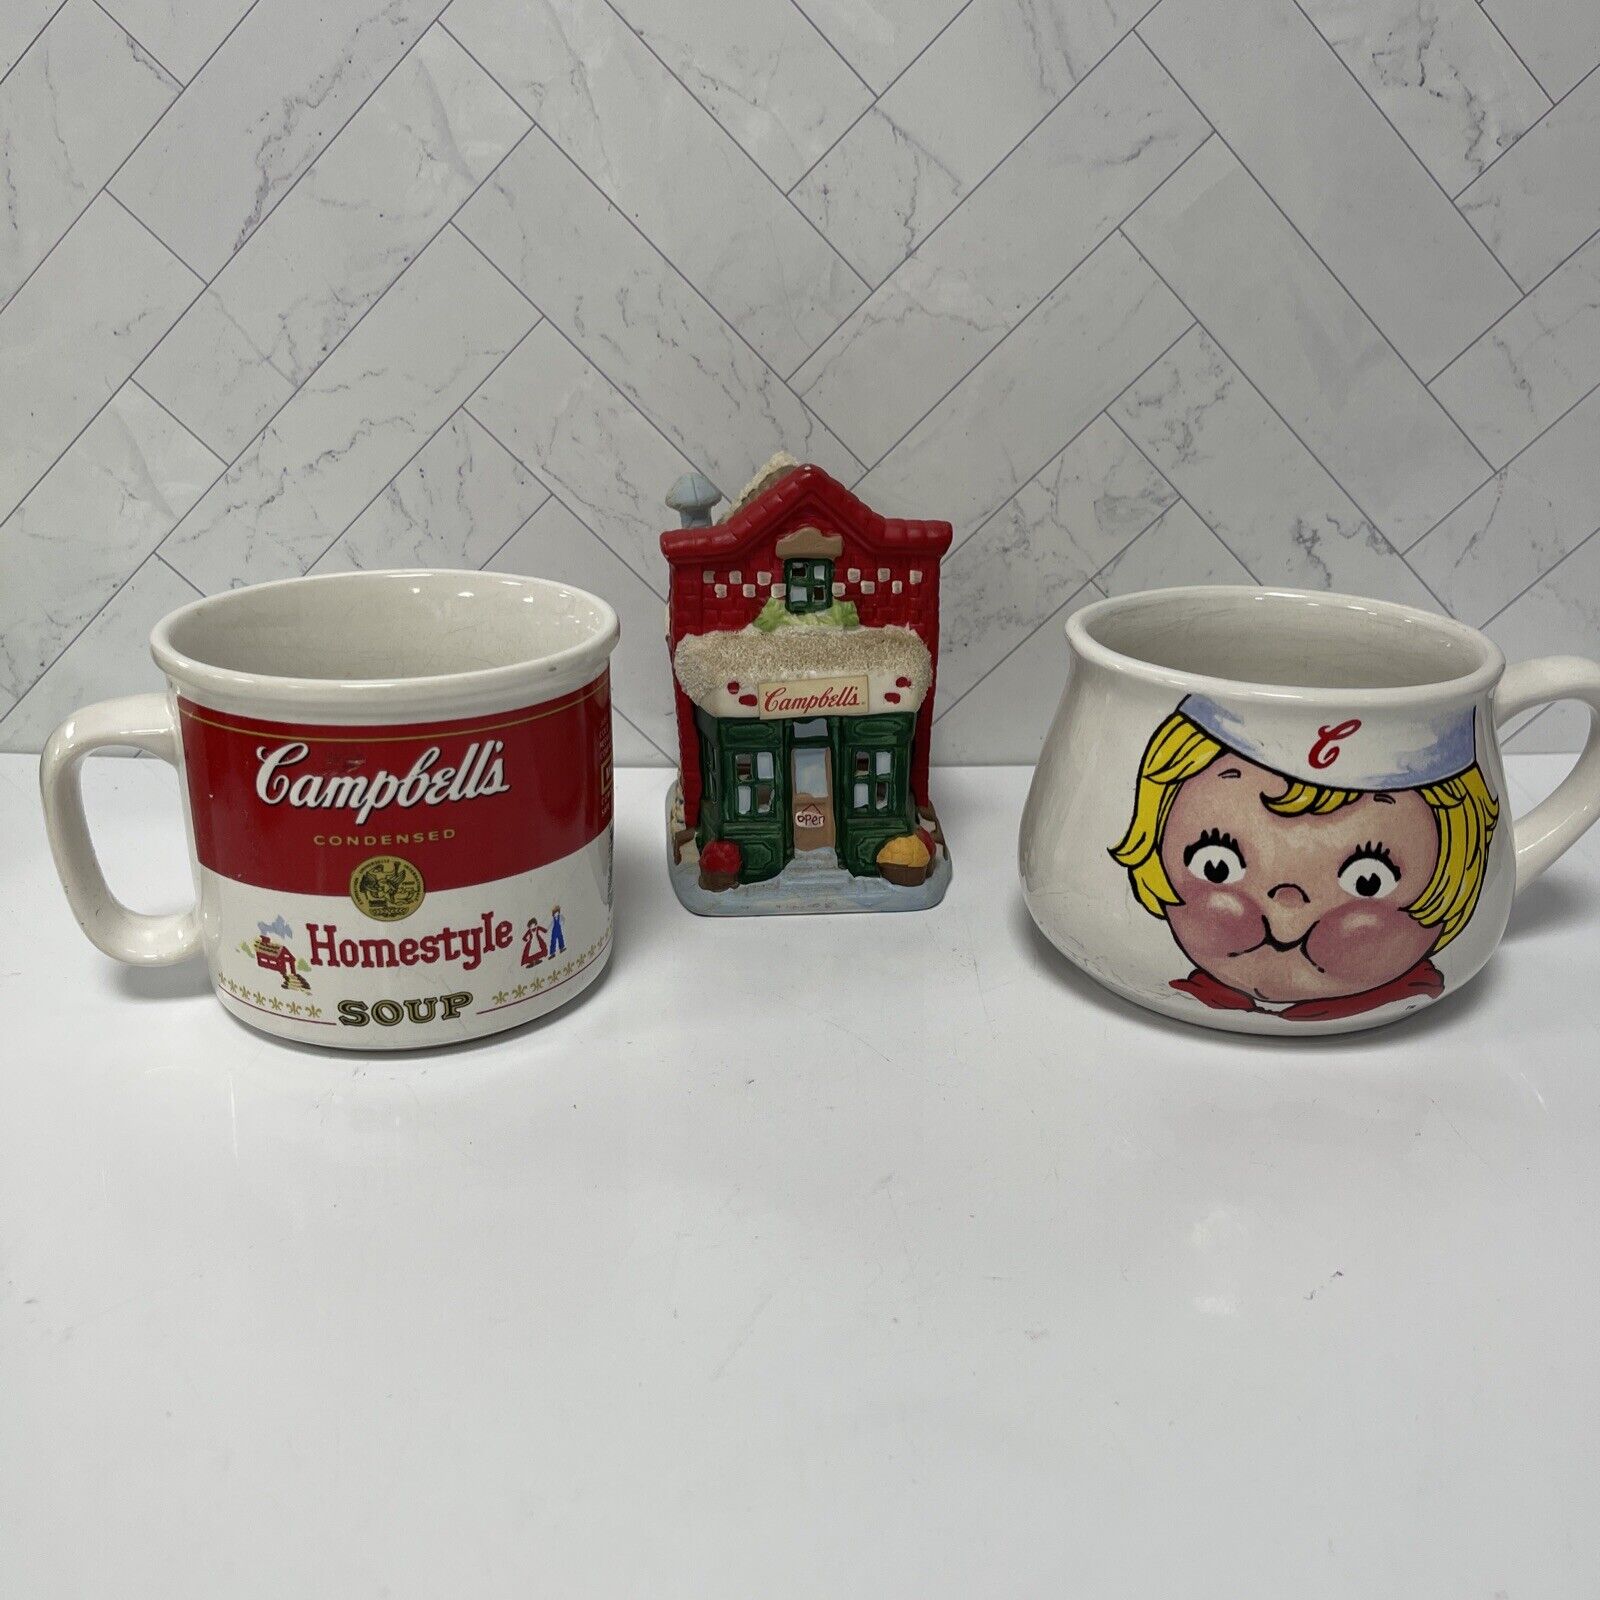 Vintage Lot of Campbells Mugs (2) and small candle votive